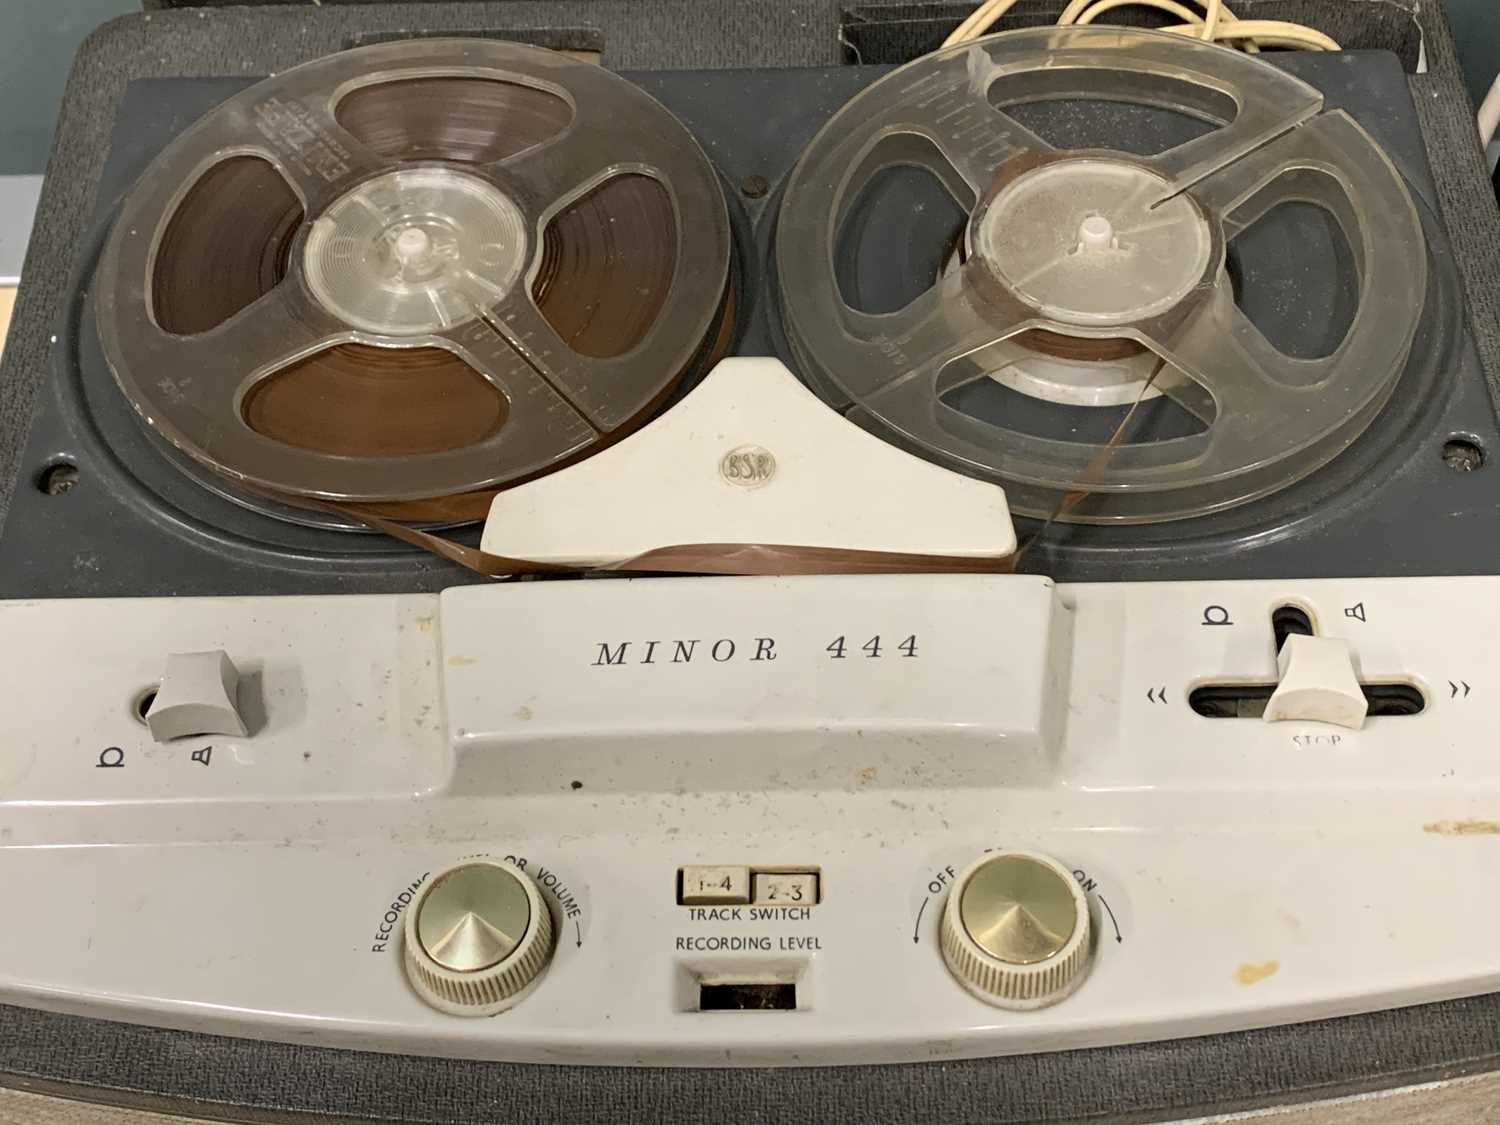 HI-FI EQUIPMENT: STEEPLETONE SMC6D SYSTEM with double tape deck and speakers, and a Minor 444 reel- - Image 2 of 3